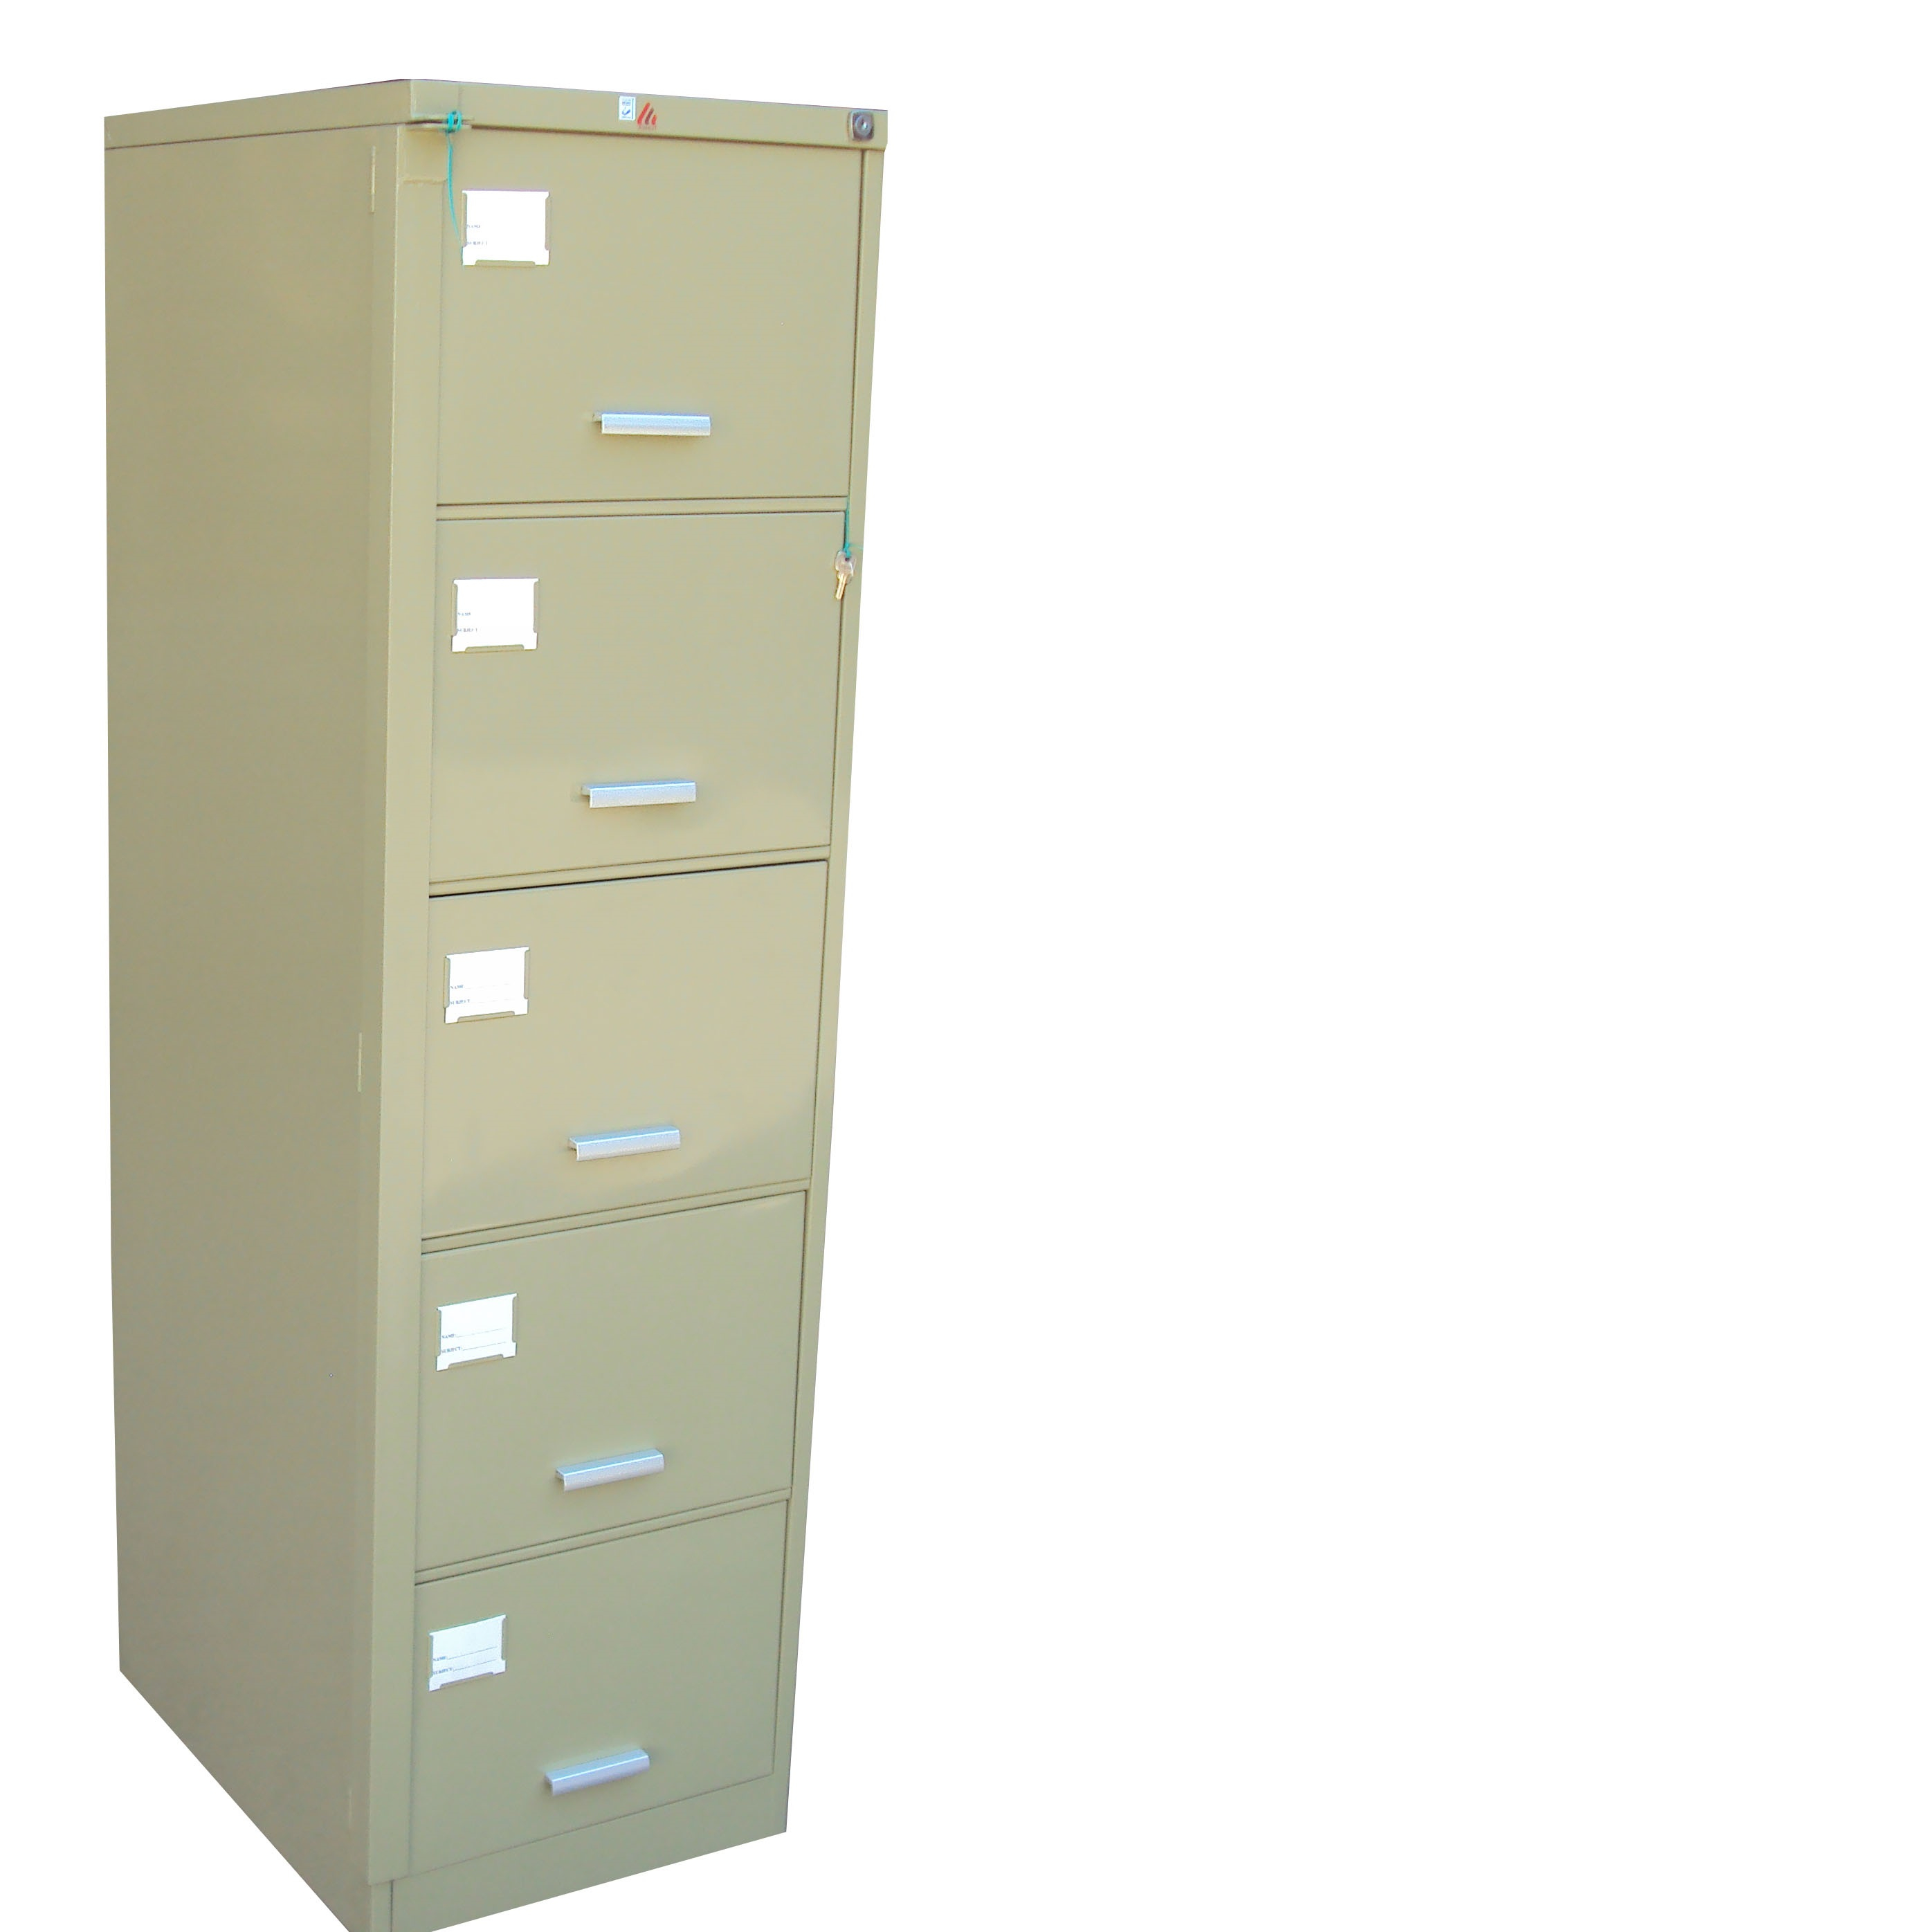 5 Drawer Filing Cabinet Ashut Engineers Limited pertaining to dimensions 2792 X 2792